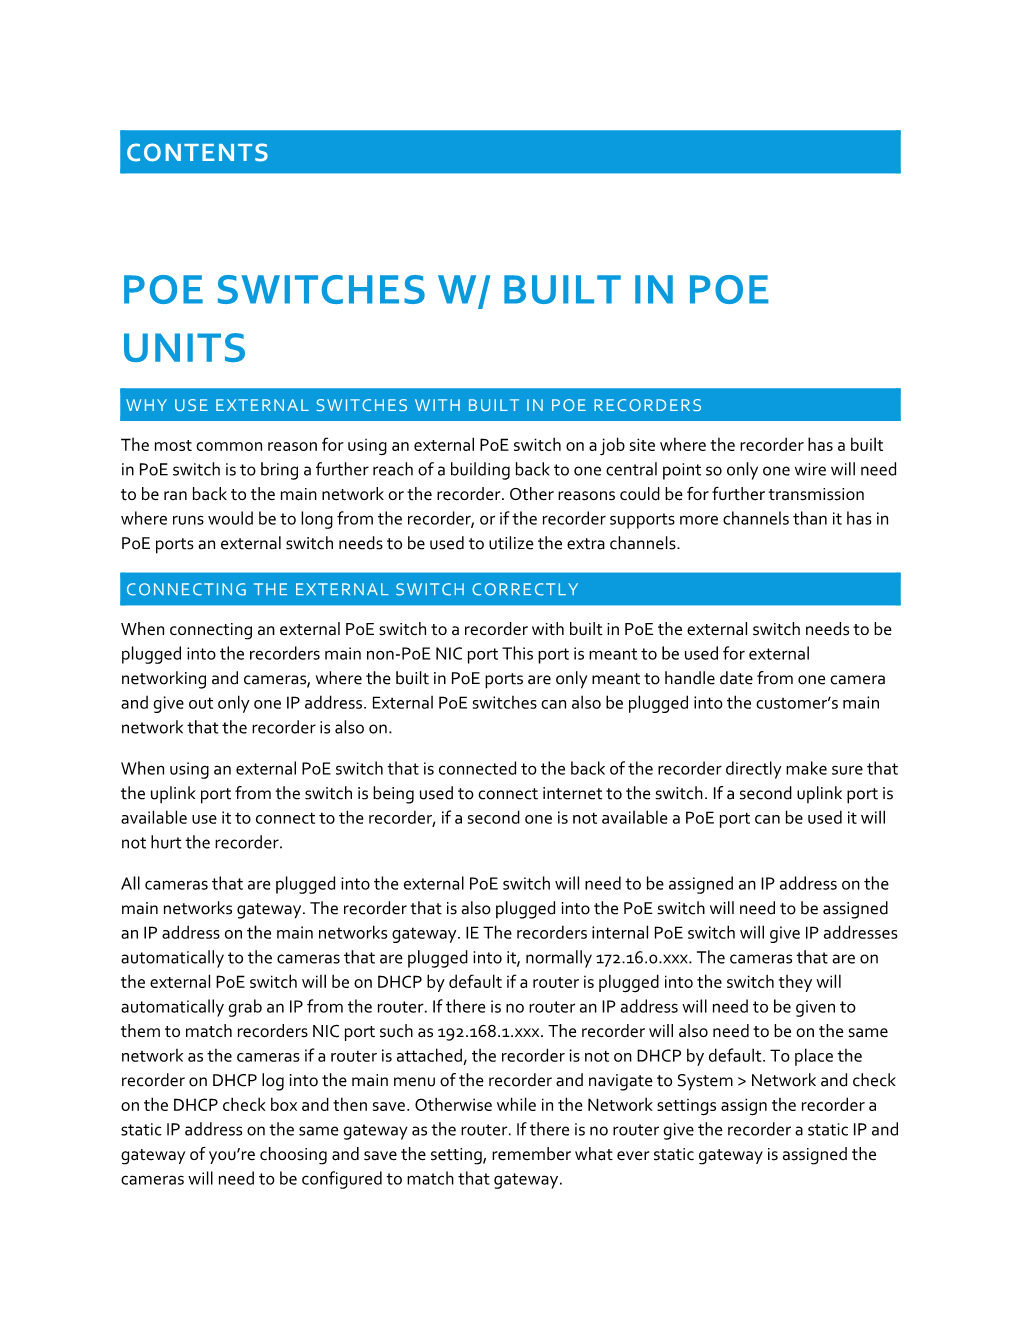 Why Use External Switches with Built in Poe Recorders